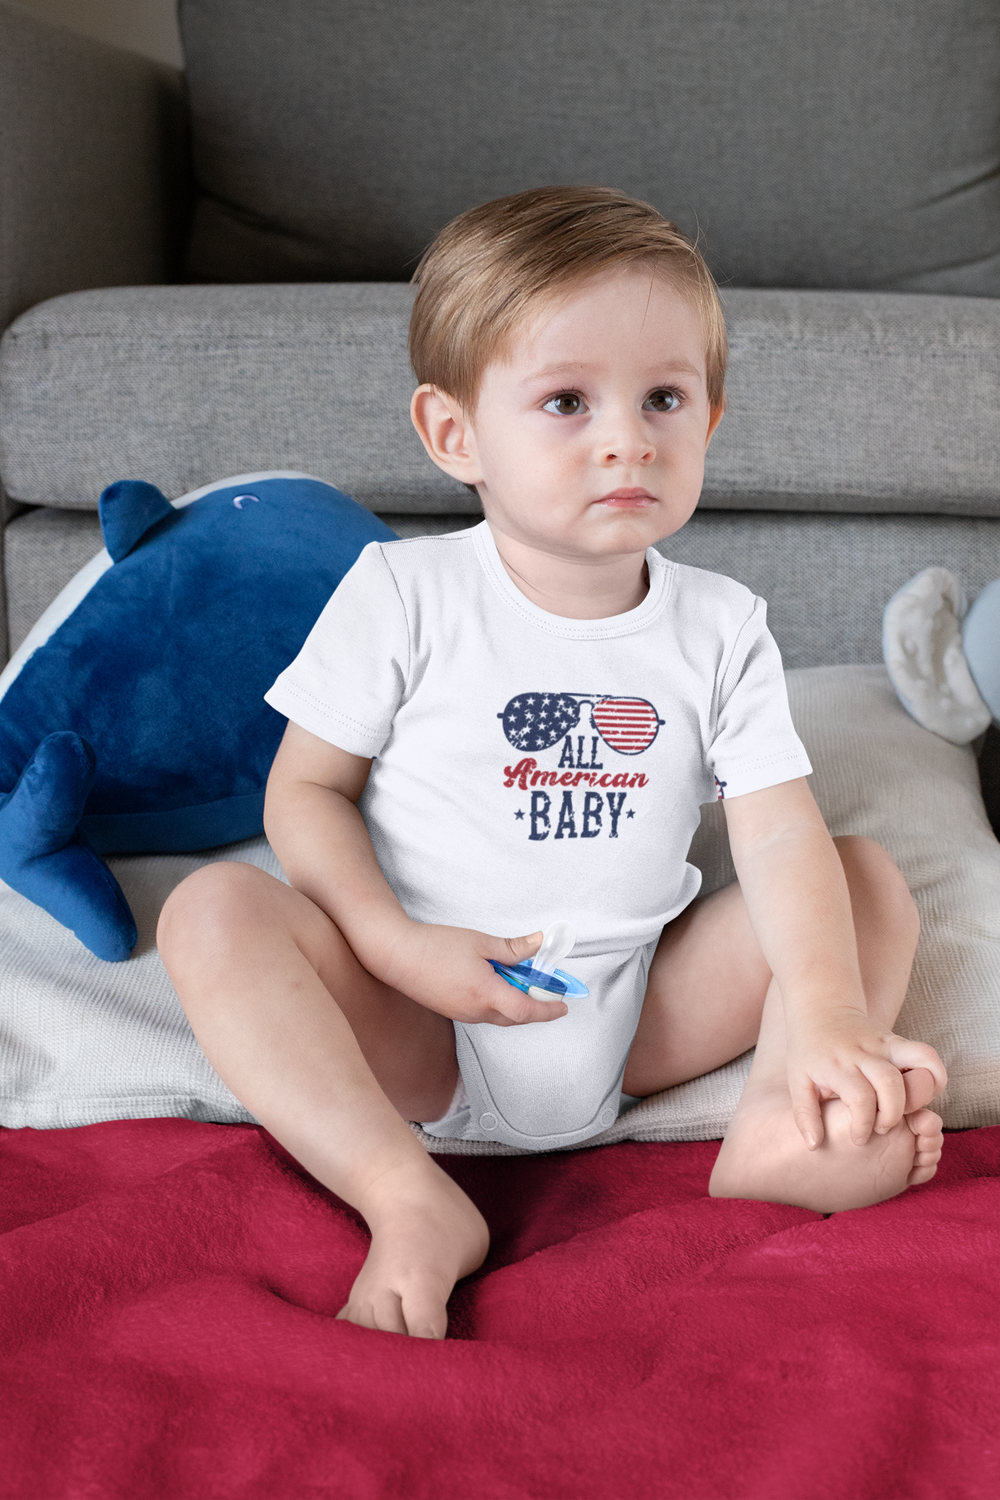 A baby in a white shirt sits comfortably on a couch, showcasing the All American Baby Onesie. Durable and soft, this infant fine jersey bodysuit features ribbed knitting for durability and plastic snaps for easy changing access.